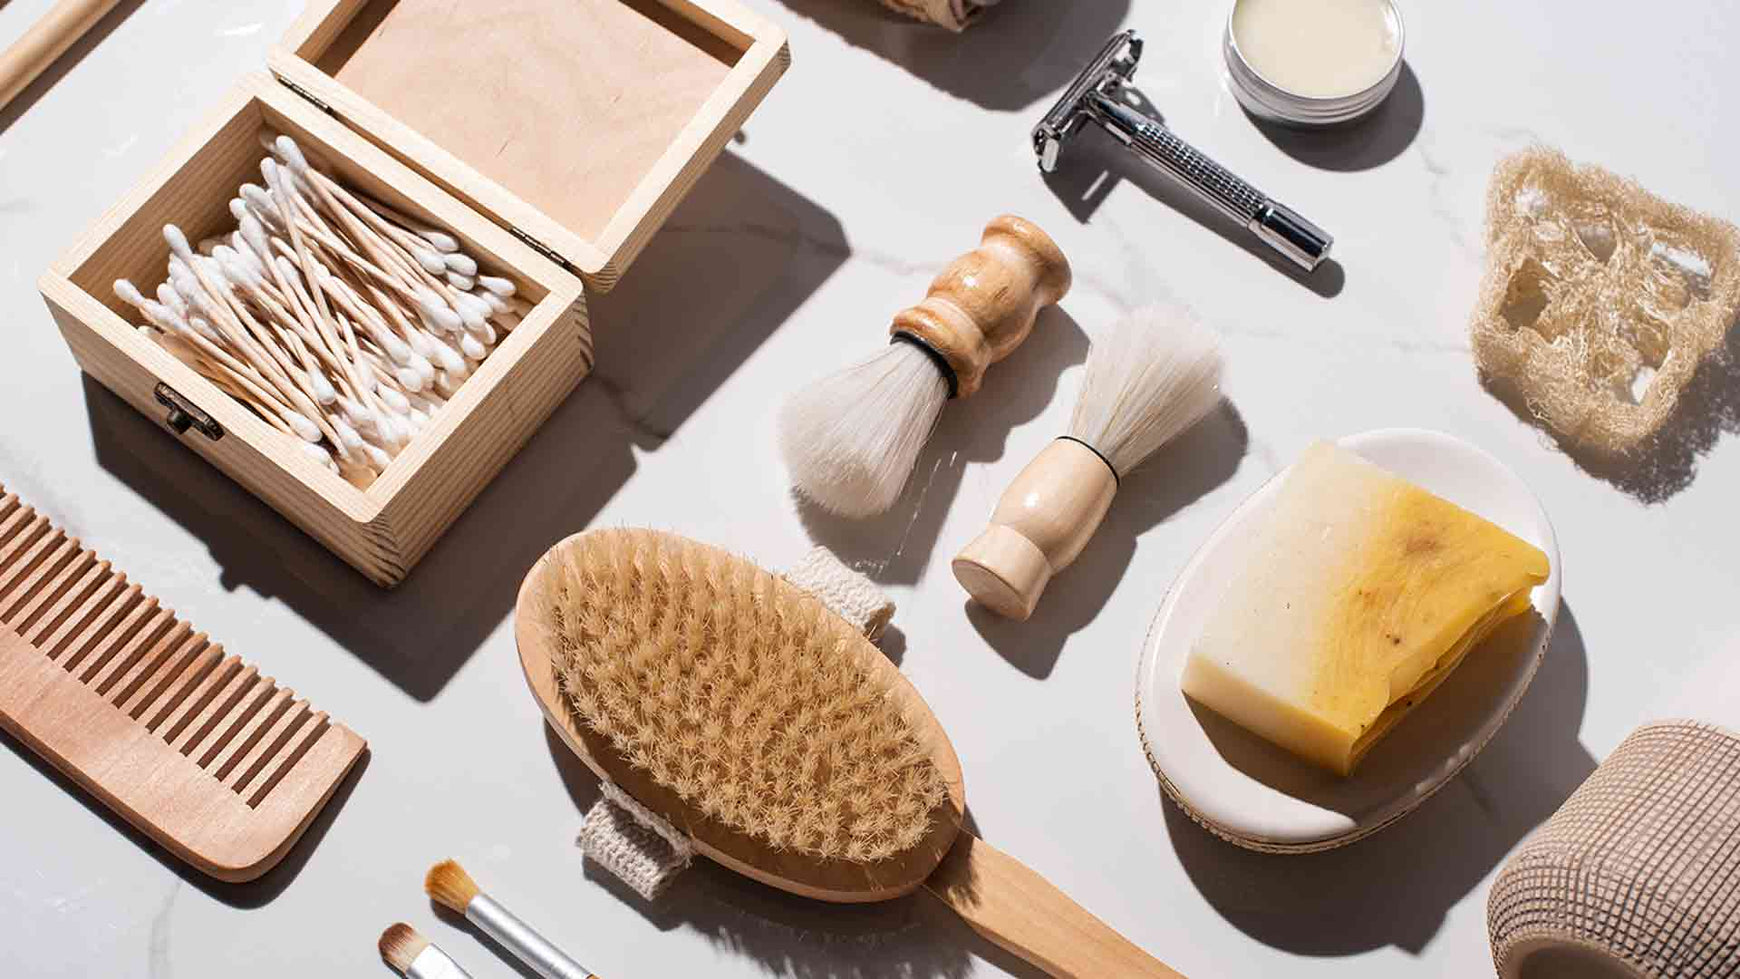 How Often Should You Replace Your Beauty Tools?